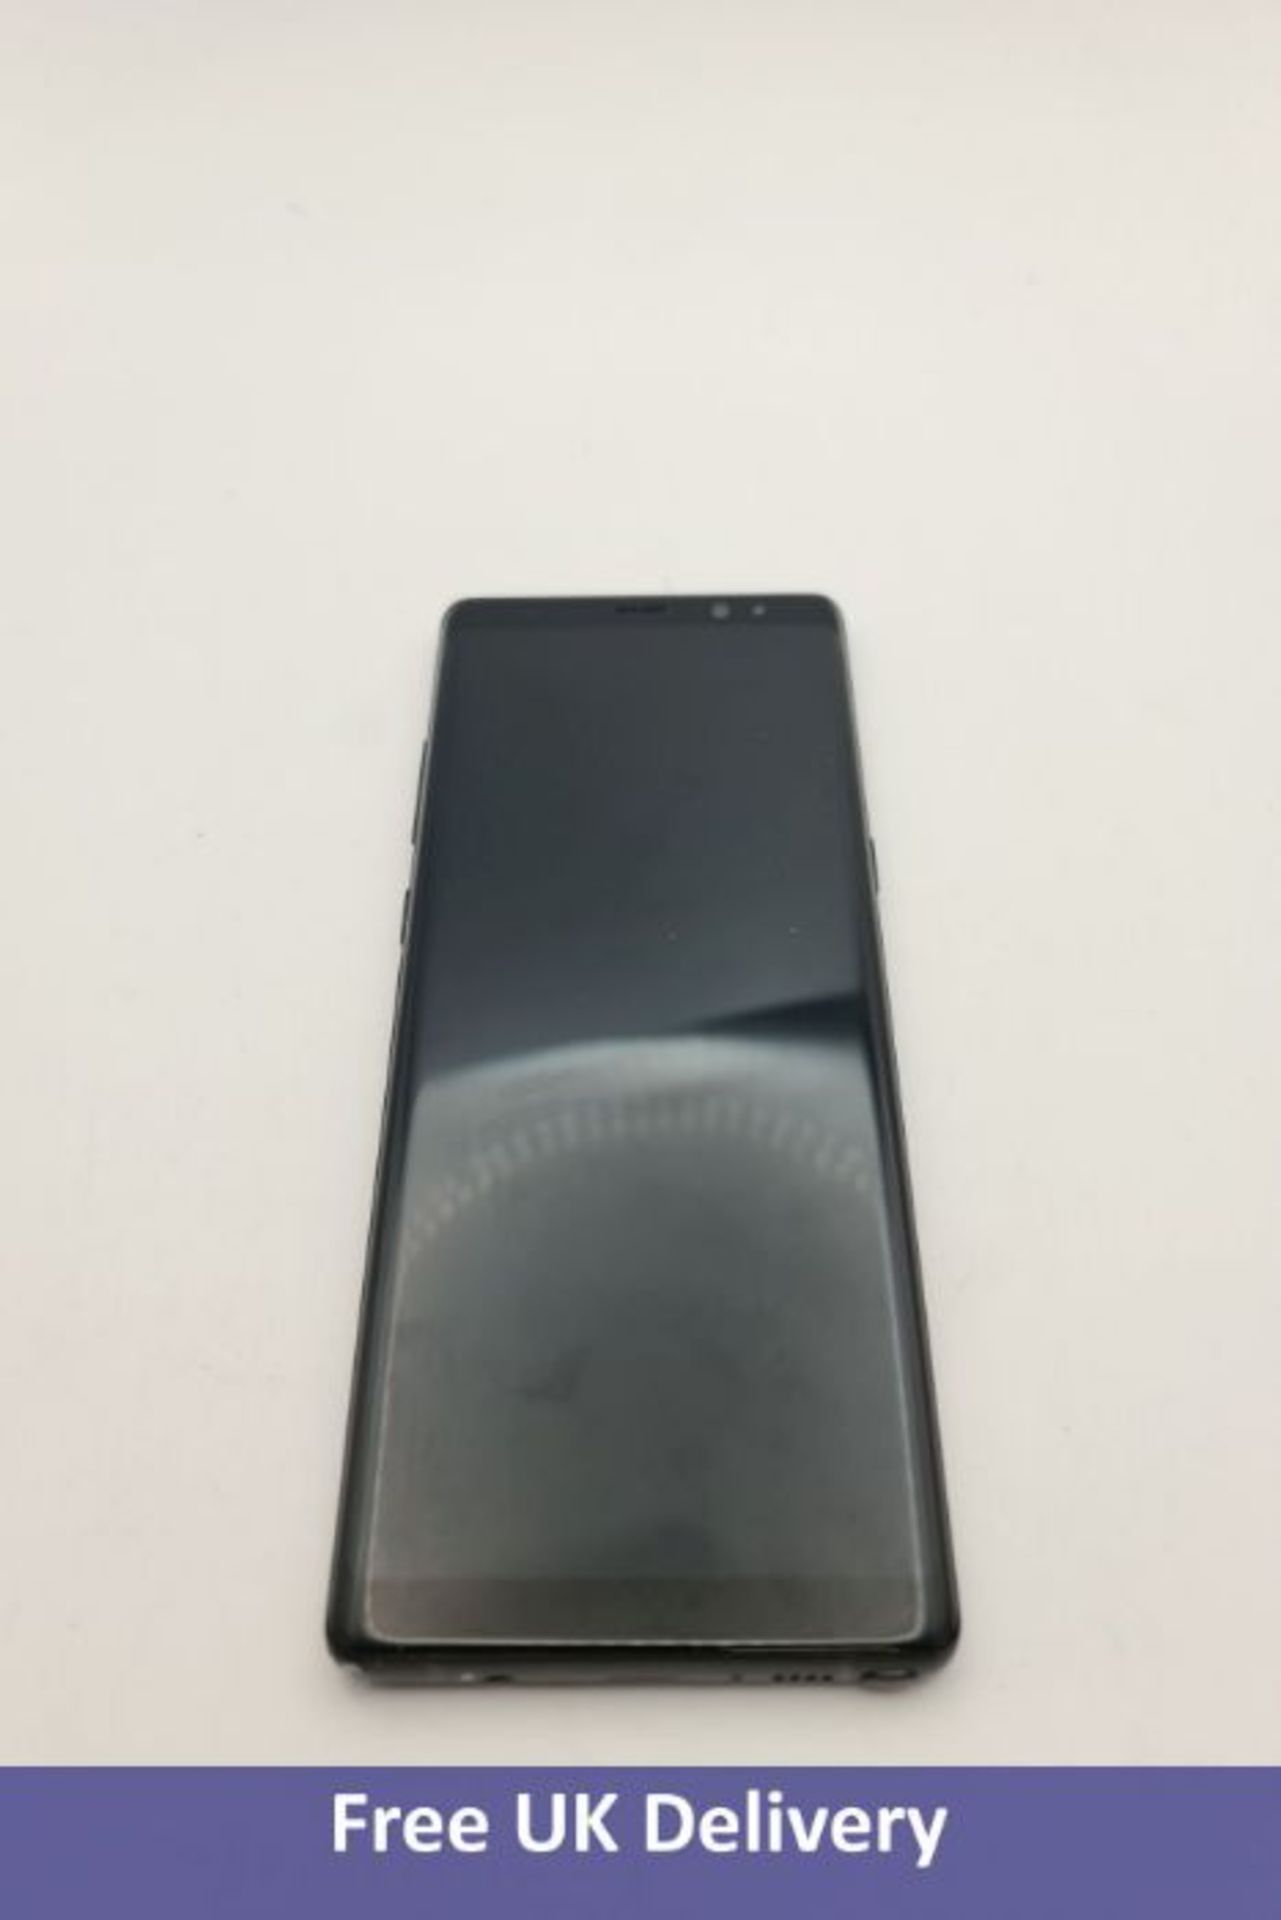 Samsung Galaxy Note 8 Android Mobile Phone, SM-N950F, 64GB. Used, no box or accessories. Checkmend c